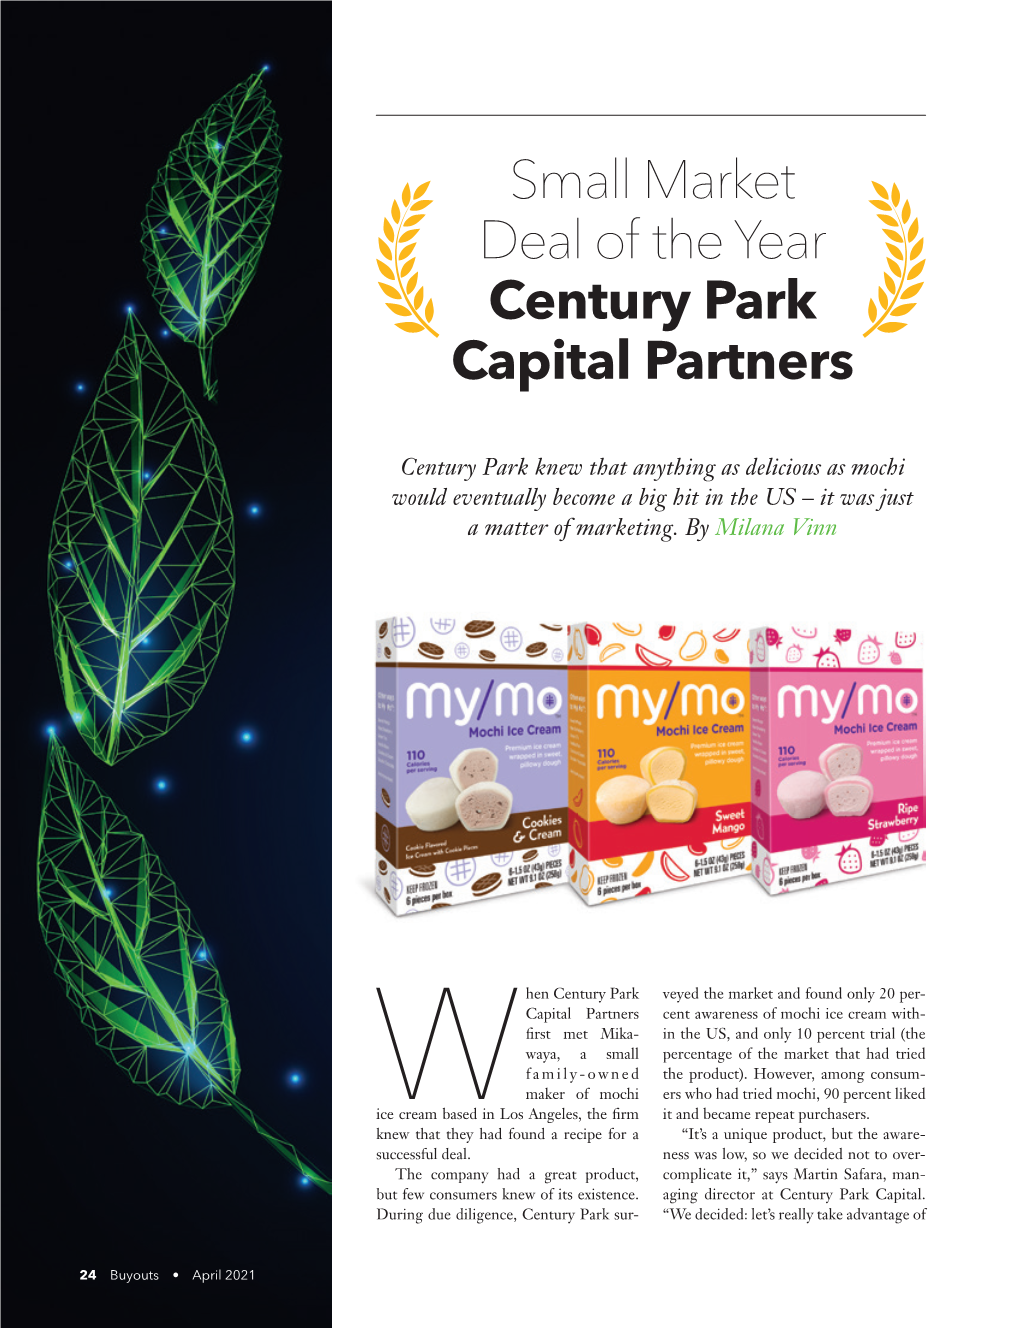 Small Market Deal of the Year Century Park Capital Partners